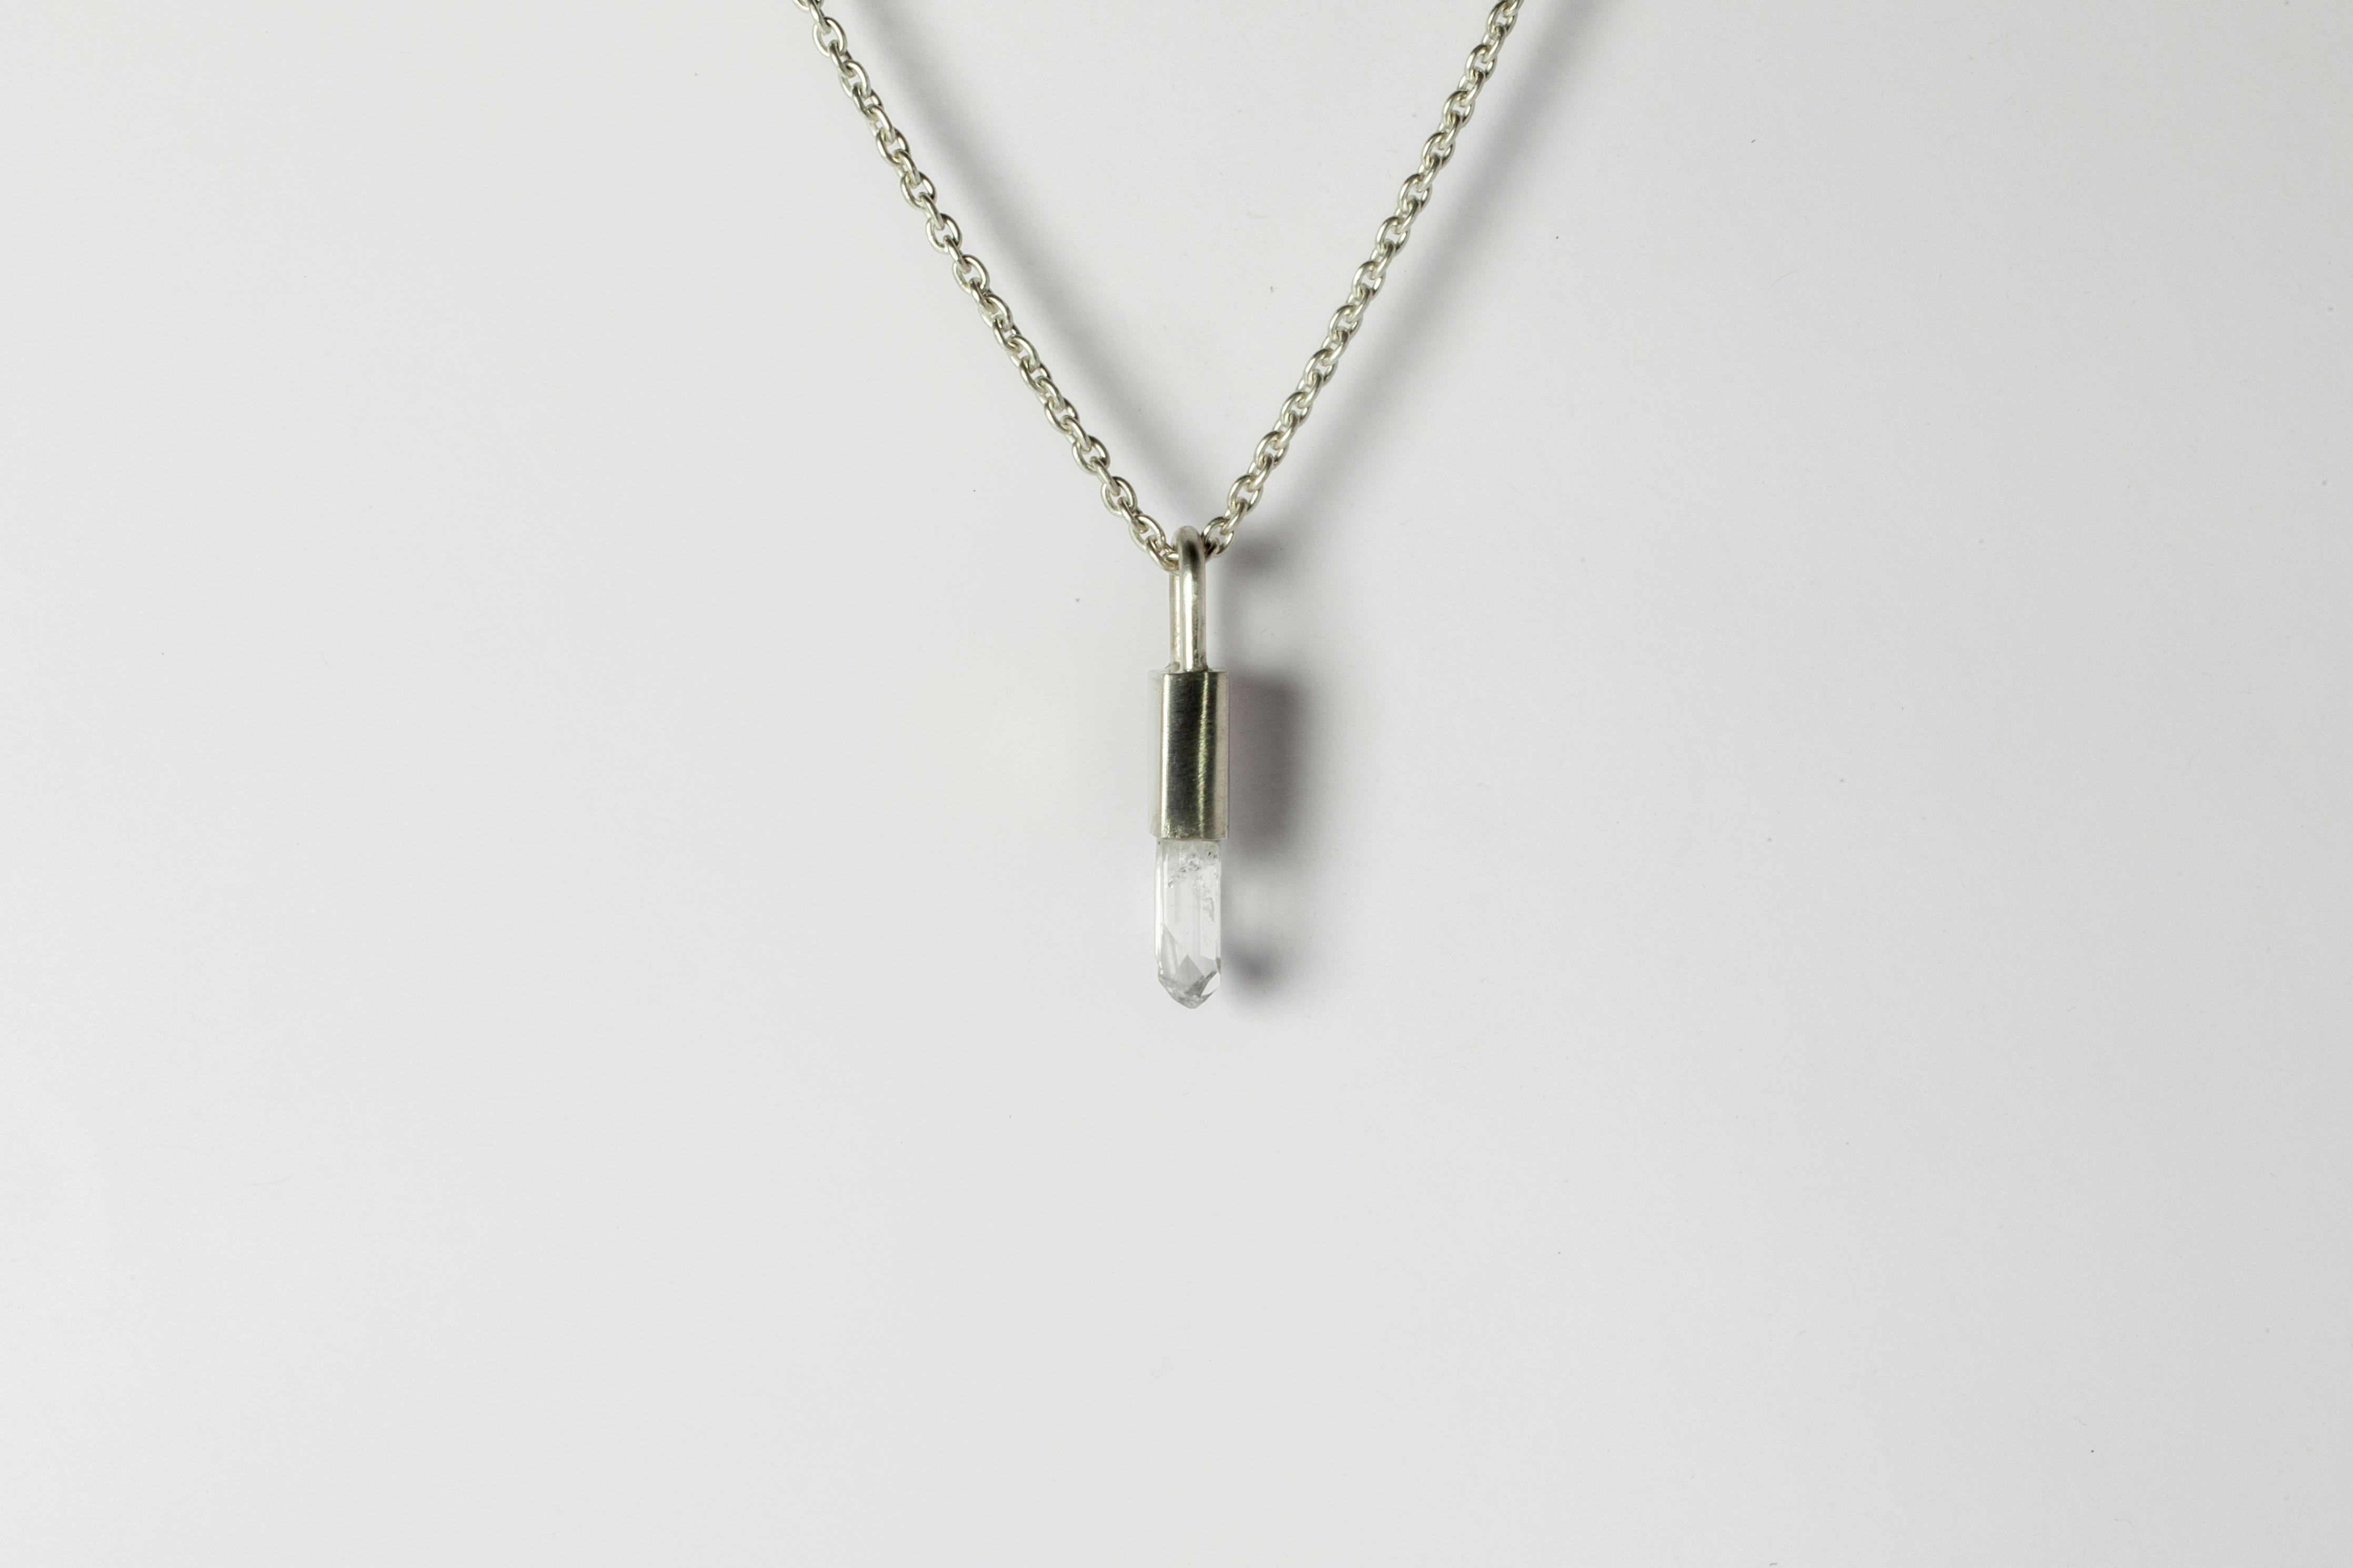 Pendant necklace in matte sterling silver and a rough of danburite. It comes on 74 cm sterling silver chain.
The Talisman series is an exploration into the power of natural crystals. The crystals used in these pieces are discovered through adventure